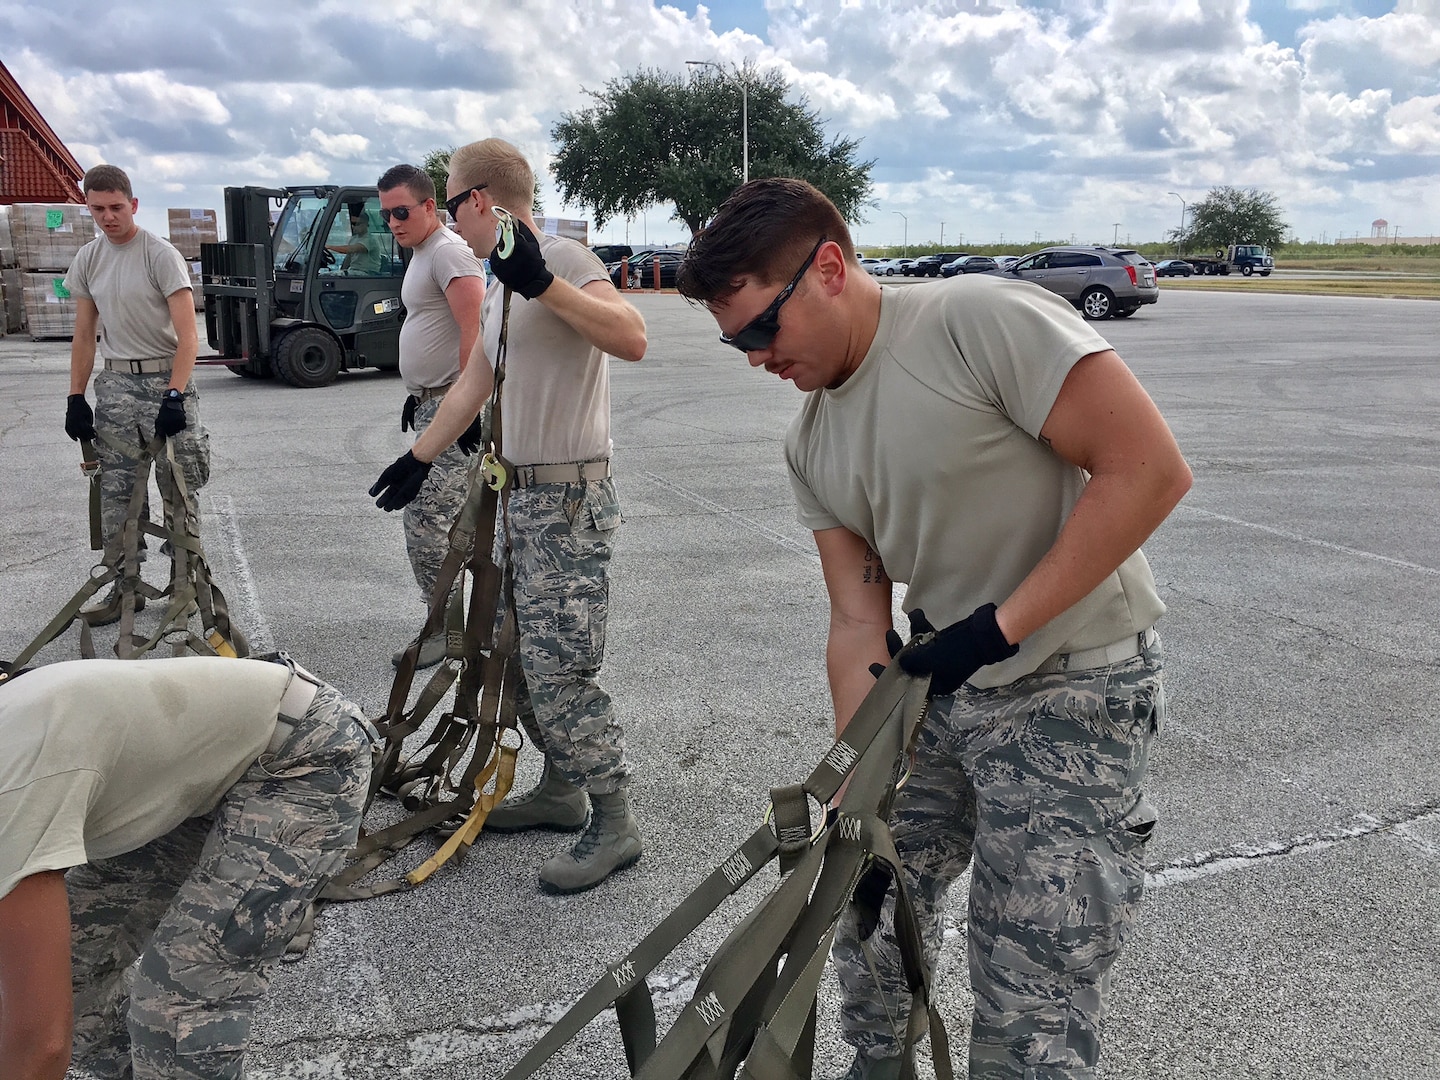 Second Lt. Alberto, 12th Training Squadron student, straightens out cargo straps to help prepare Hurricane Maria relief supplies for air transport Sept. 22, 2017, at Joint Base San Antonio-Kelly Field.  The supplies were being staged at the Federal Emergency Management Agency’s Incident Support Base at Kelly for transport to areas devastated by Hurricane Maria. (U.S. Air Force image/Dan Hawkins)